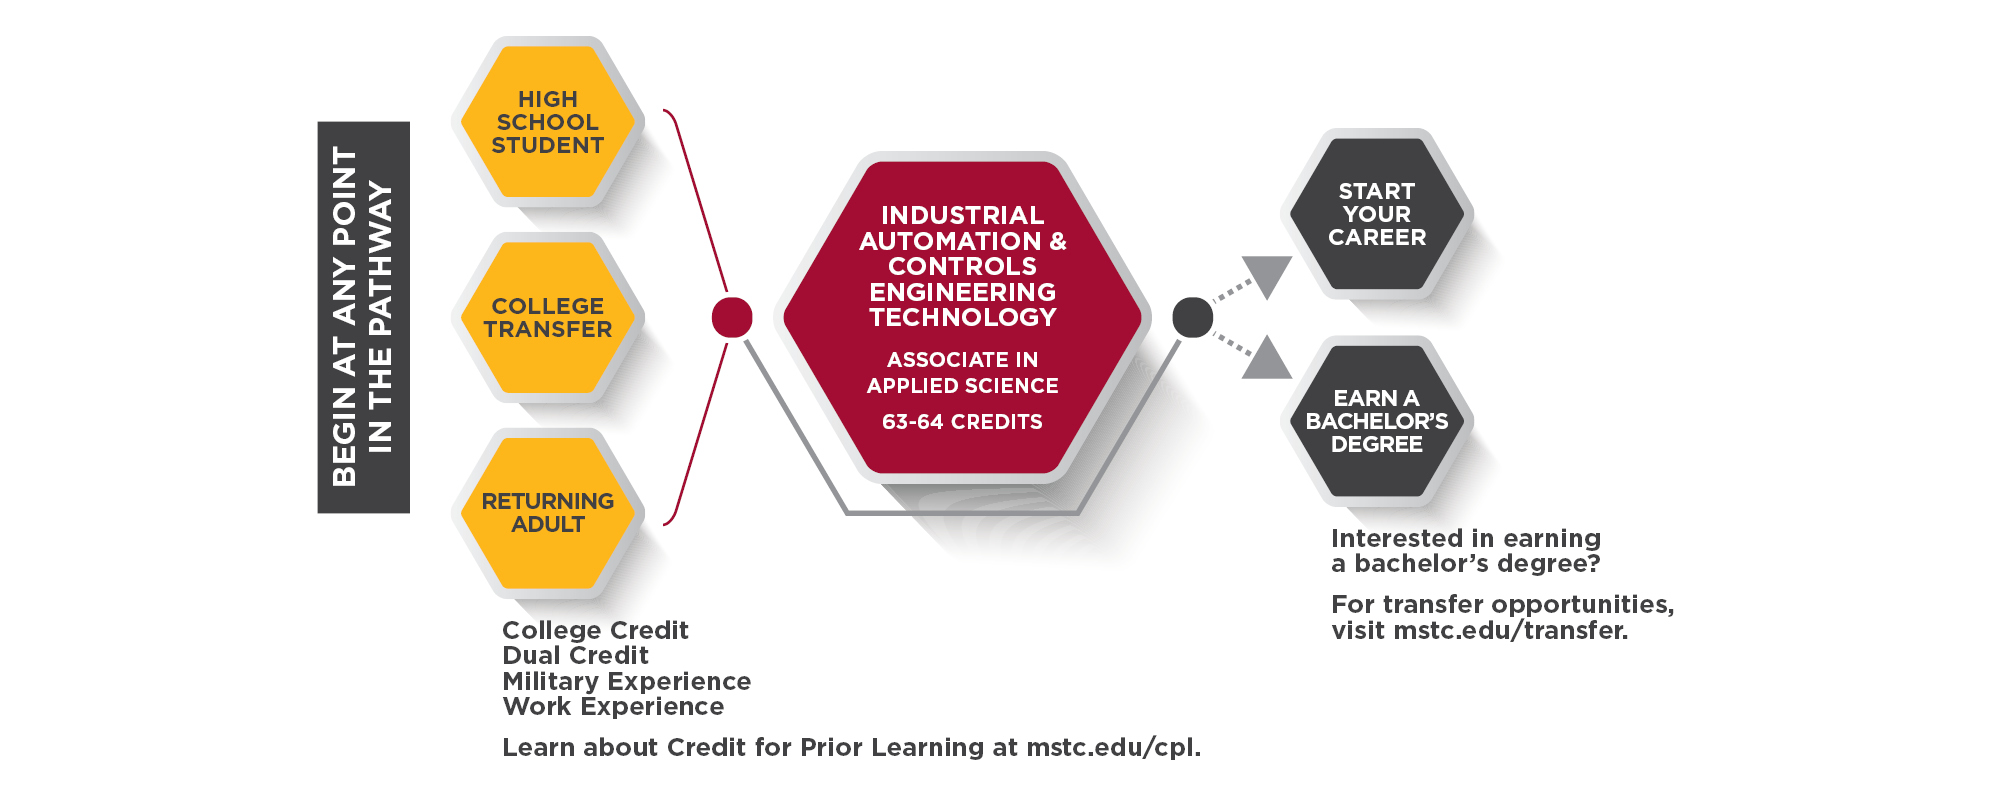 Industrial Automation and Controls Engineering Technology Program Pathway